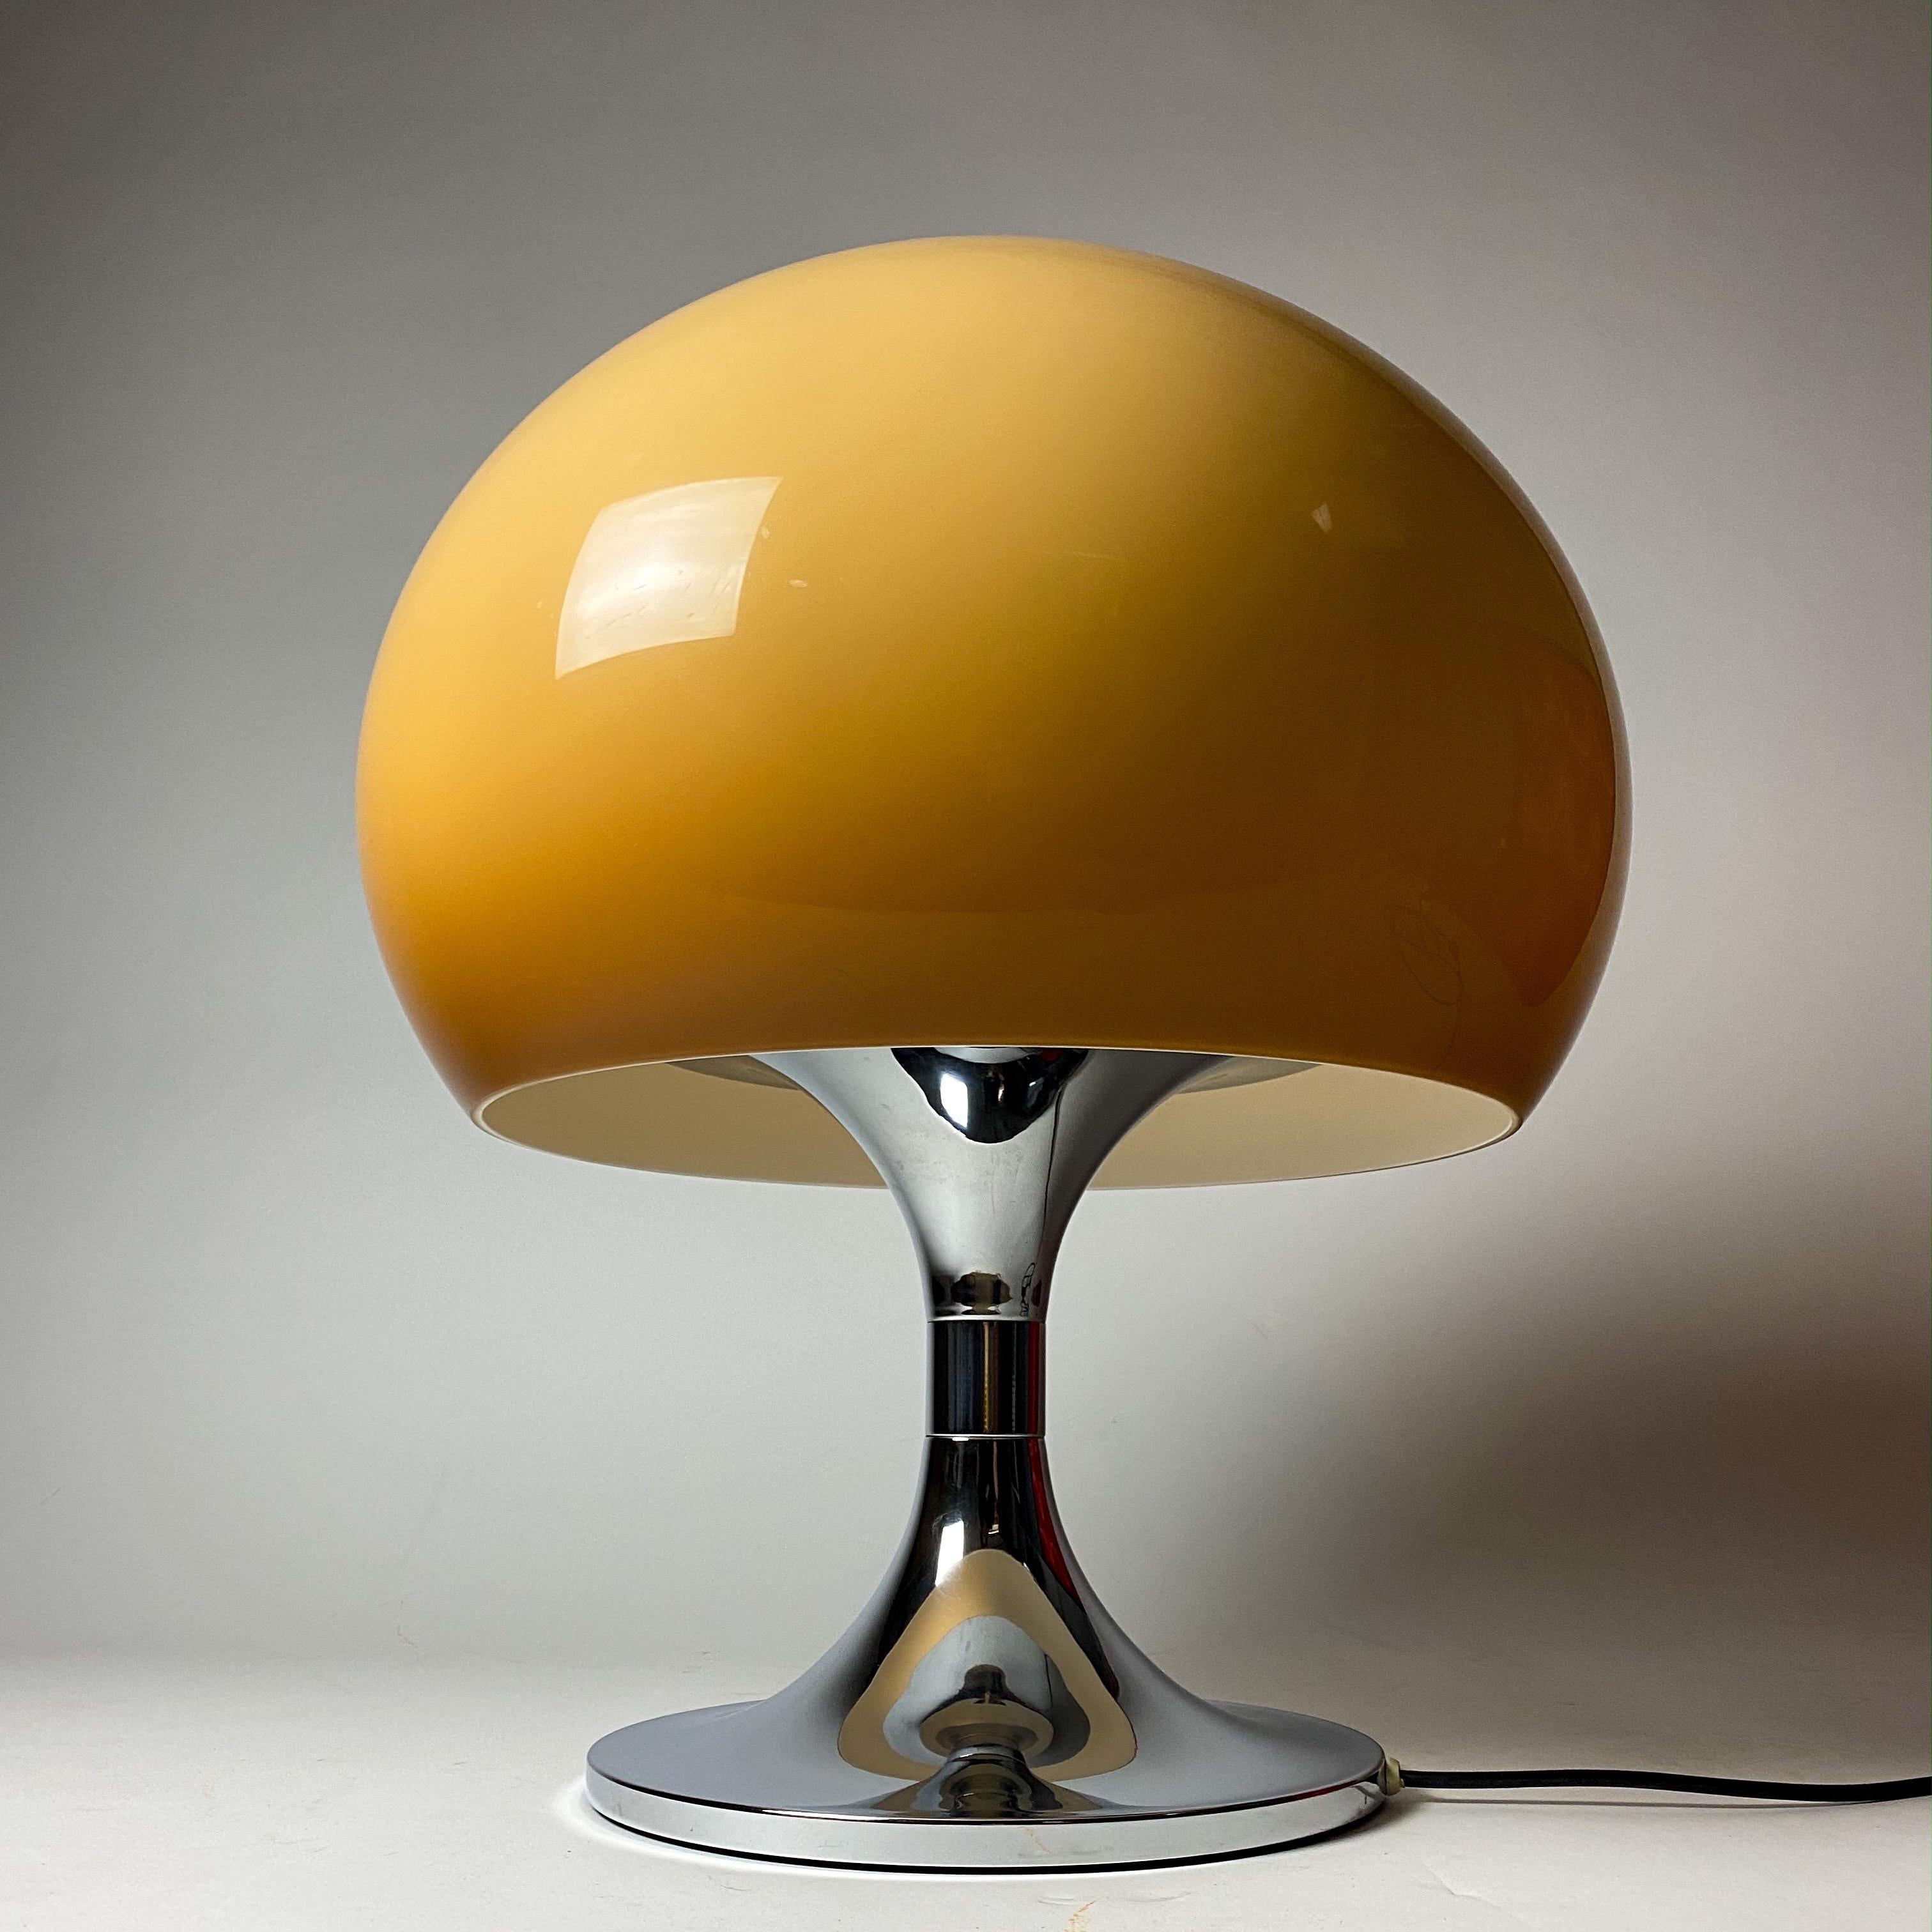 Beautiful caramel colored mushroom table lamp in style of Harvey Guzzini, Italy, 1970s.

Chrome base with a beautiful well-kept caramel colored shade. The color of the shade goes from dark brown at the bottom to light brown at the top.

This